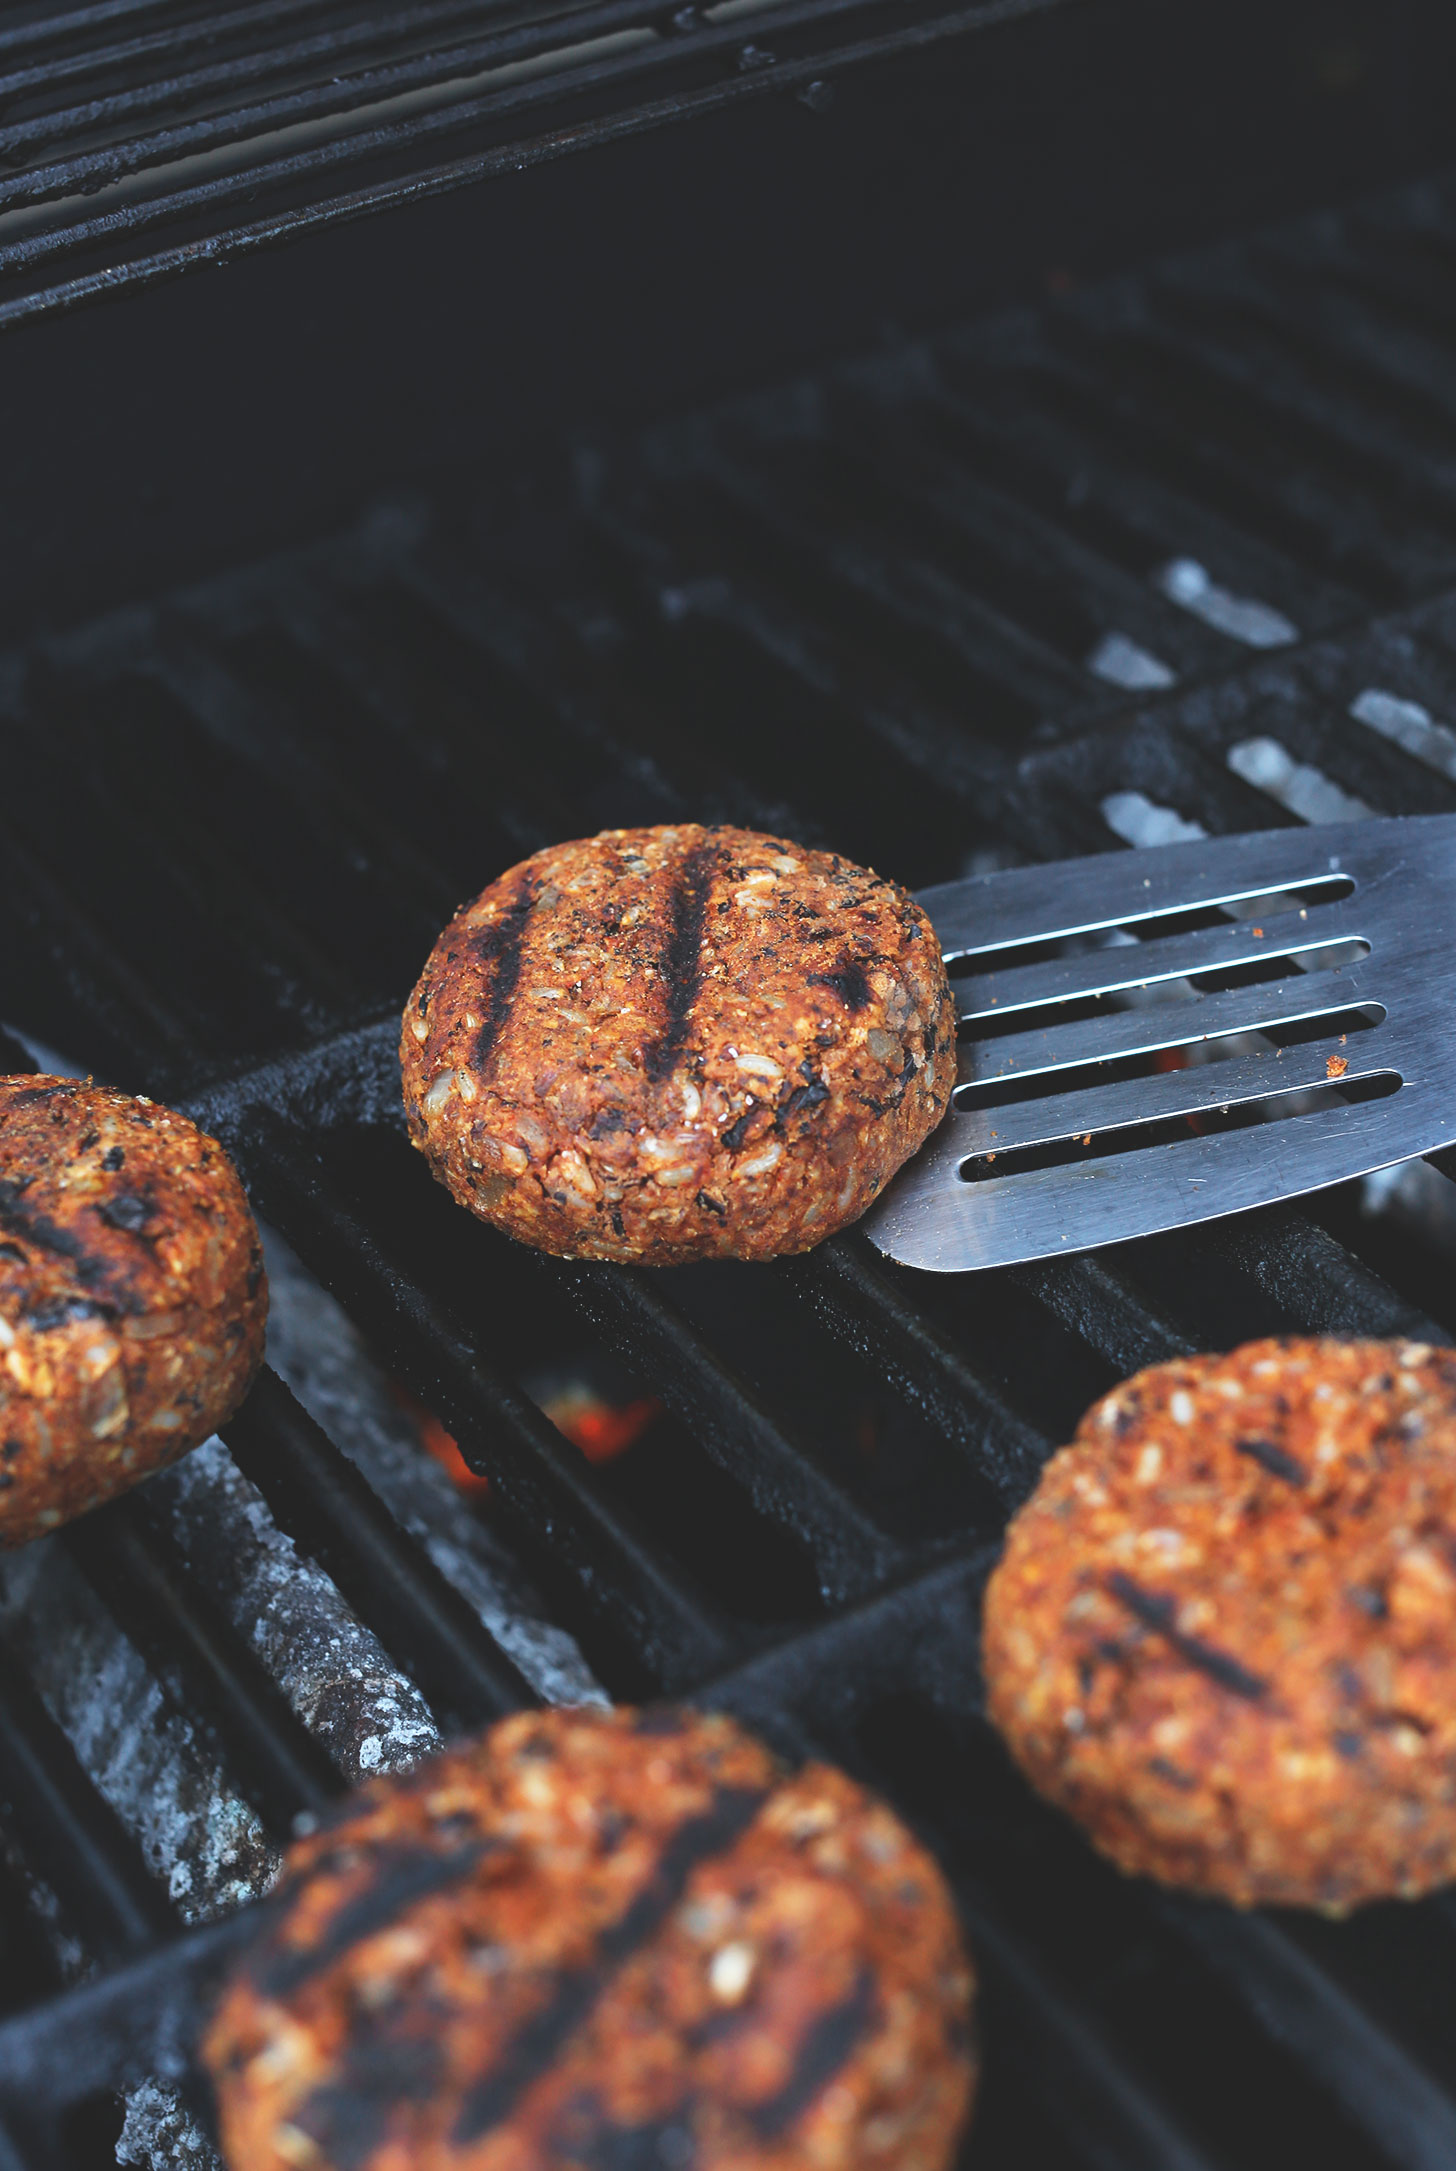 Grilling flavorful Veggie Burgers for a vegan summertime meal